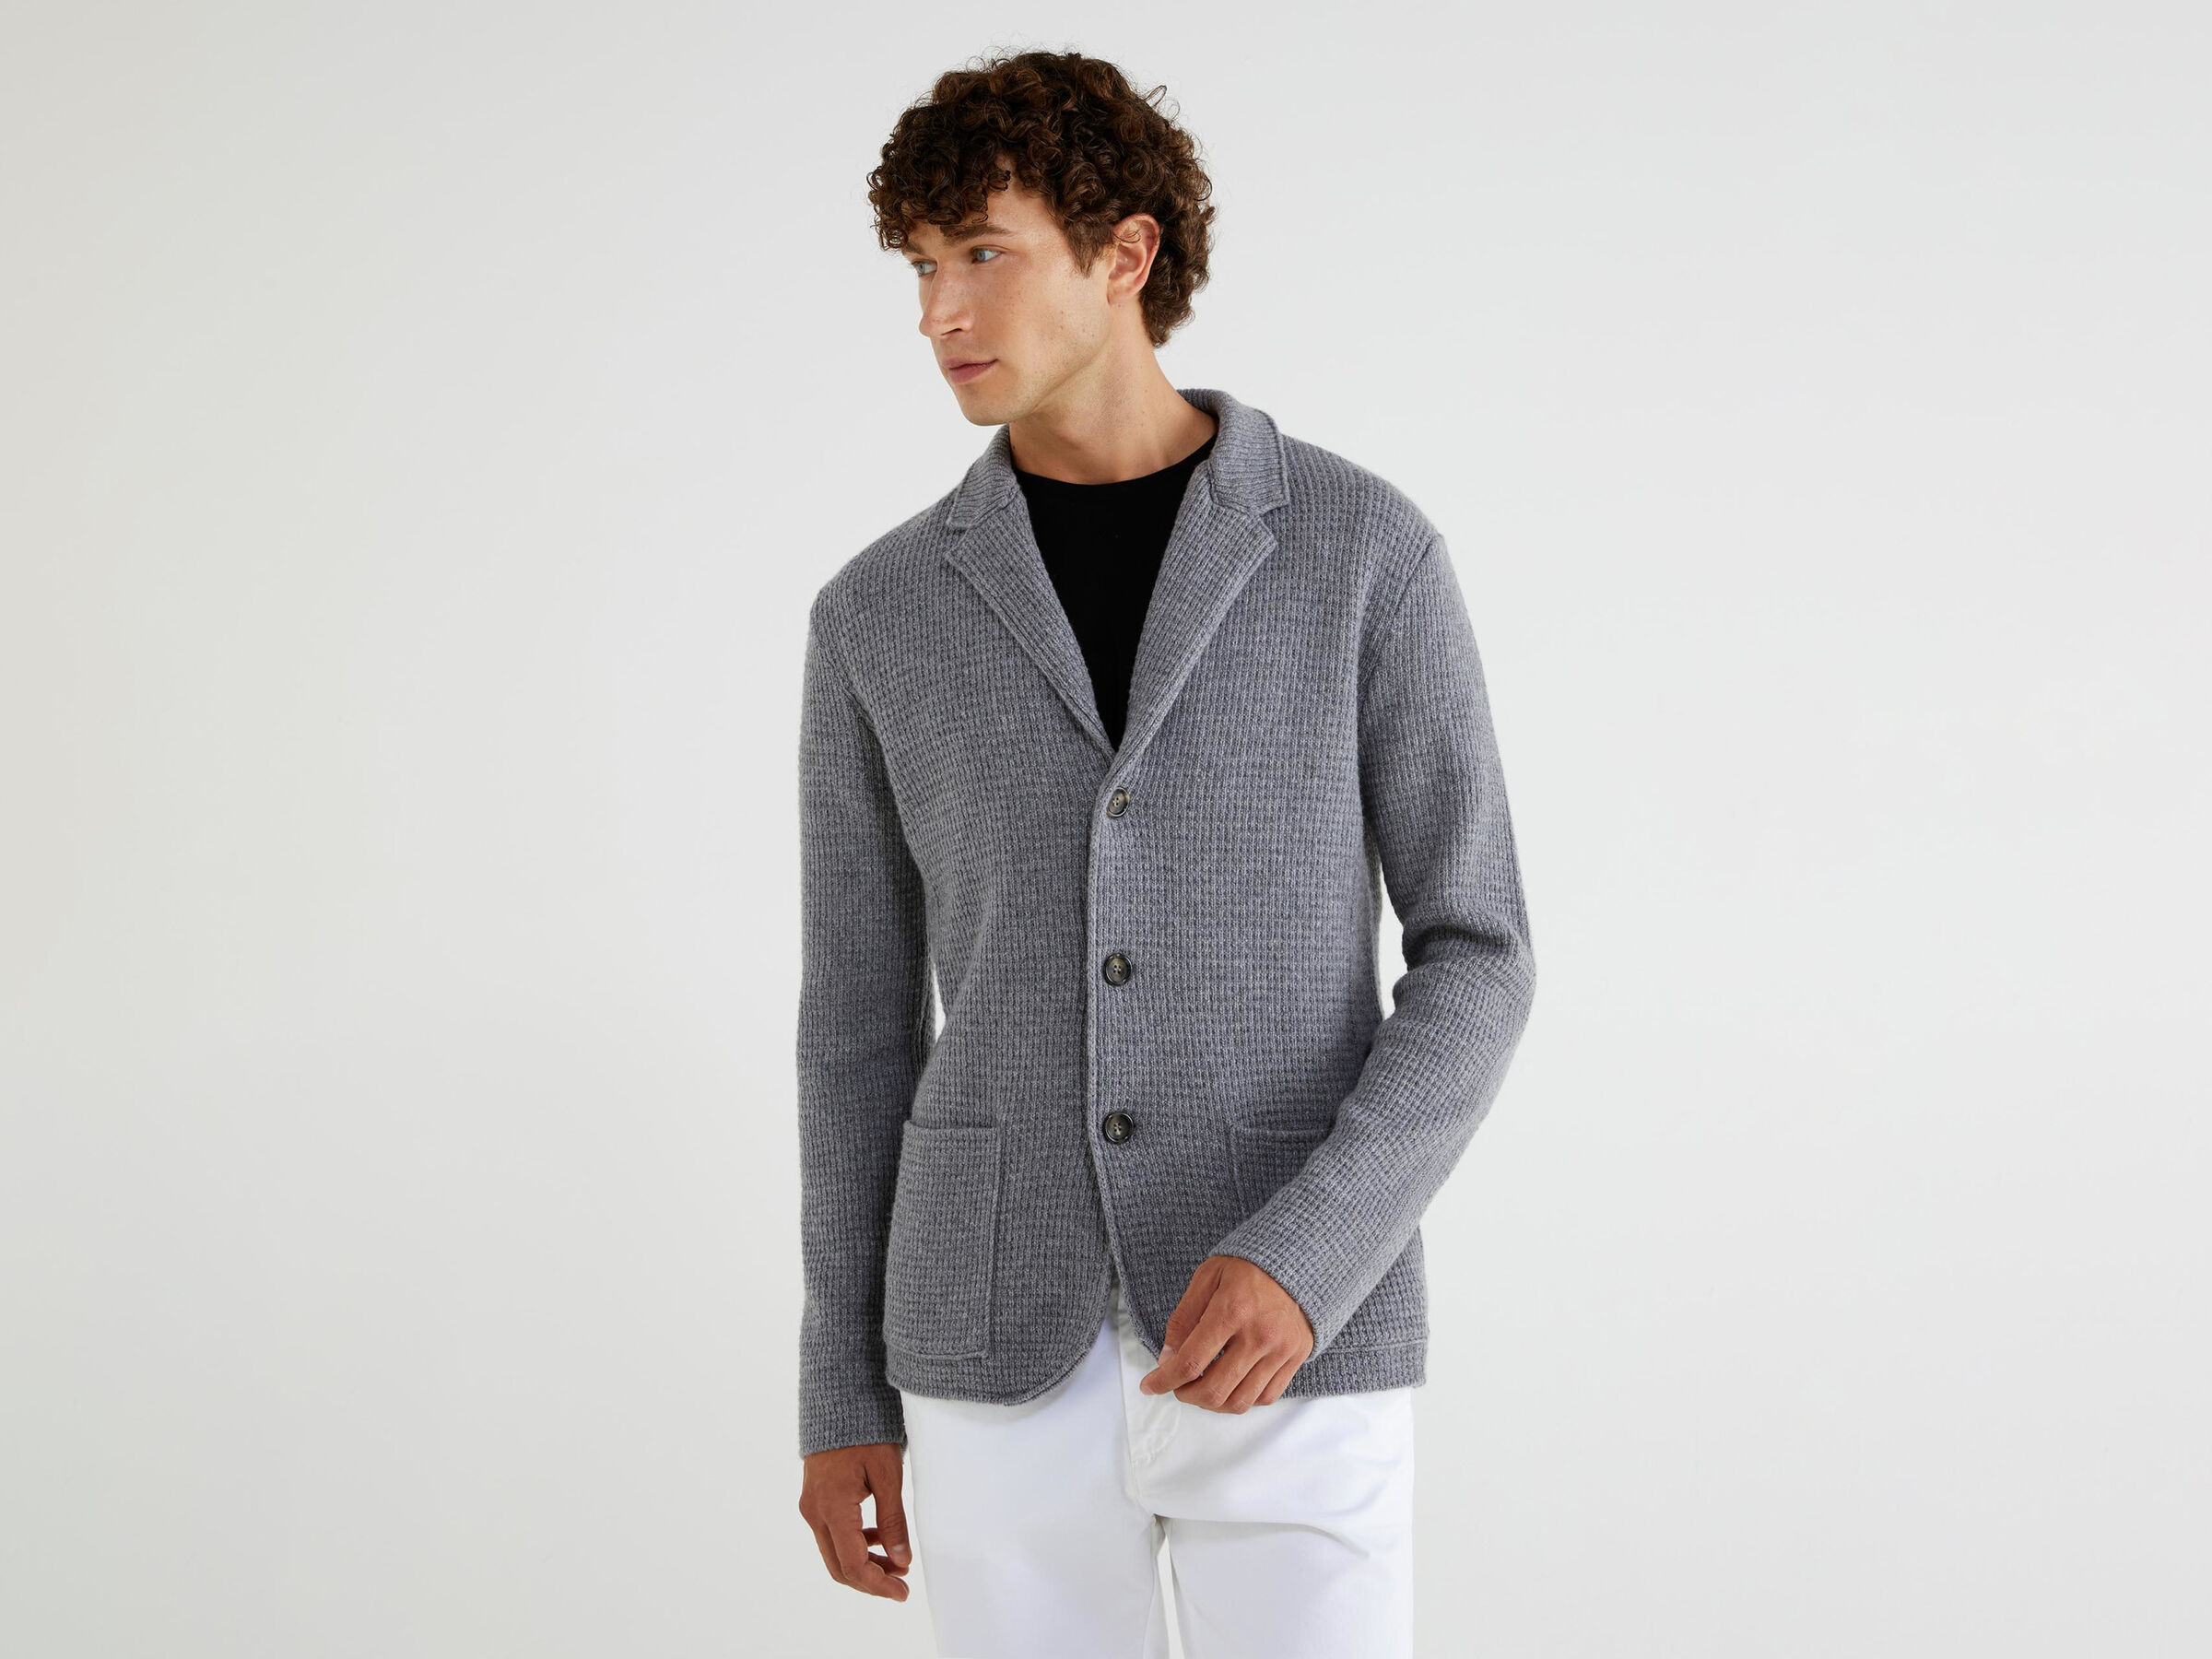 A Few Things to Know About Wearing a Knit Blazer